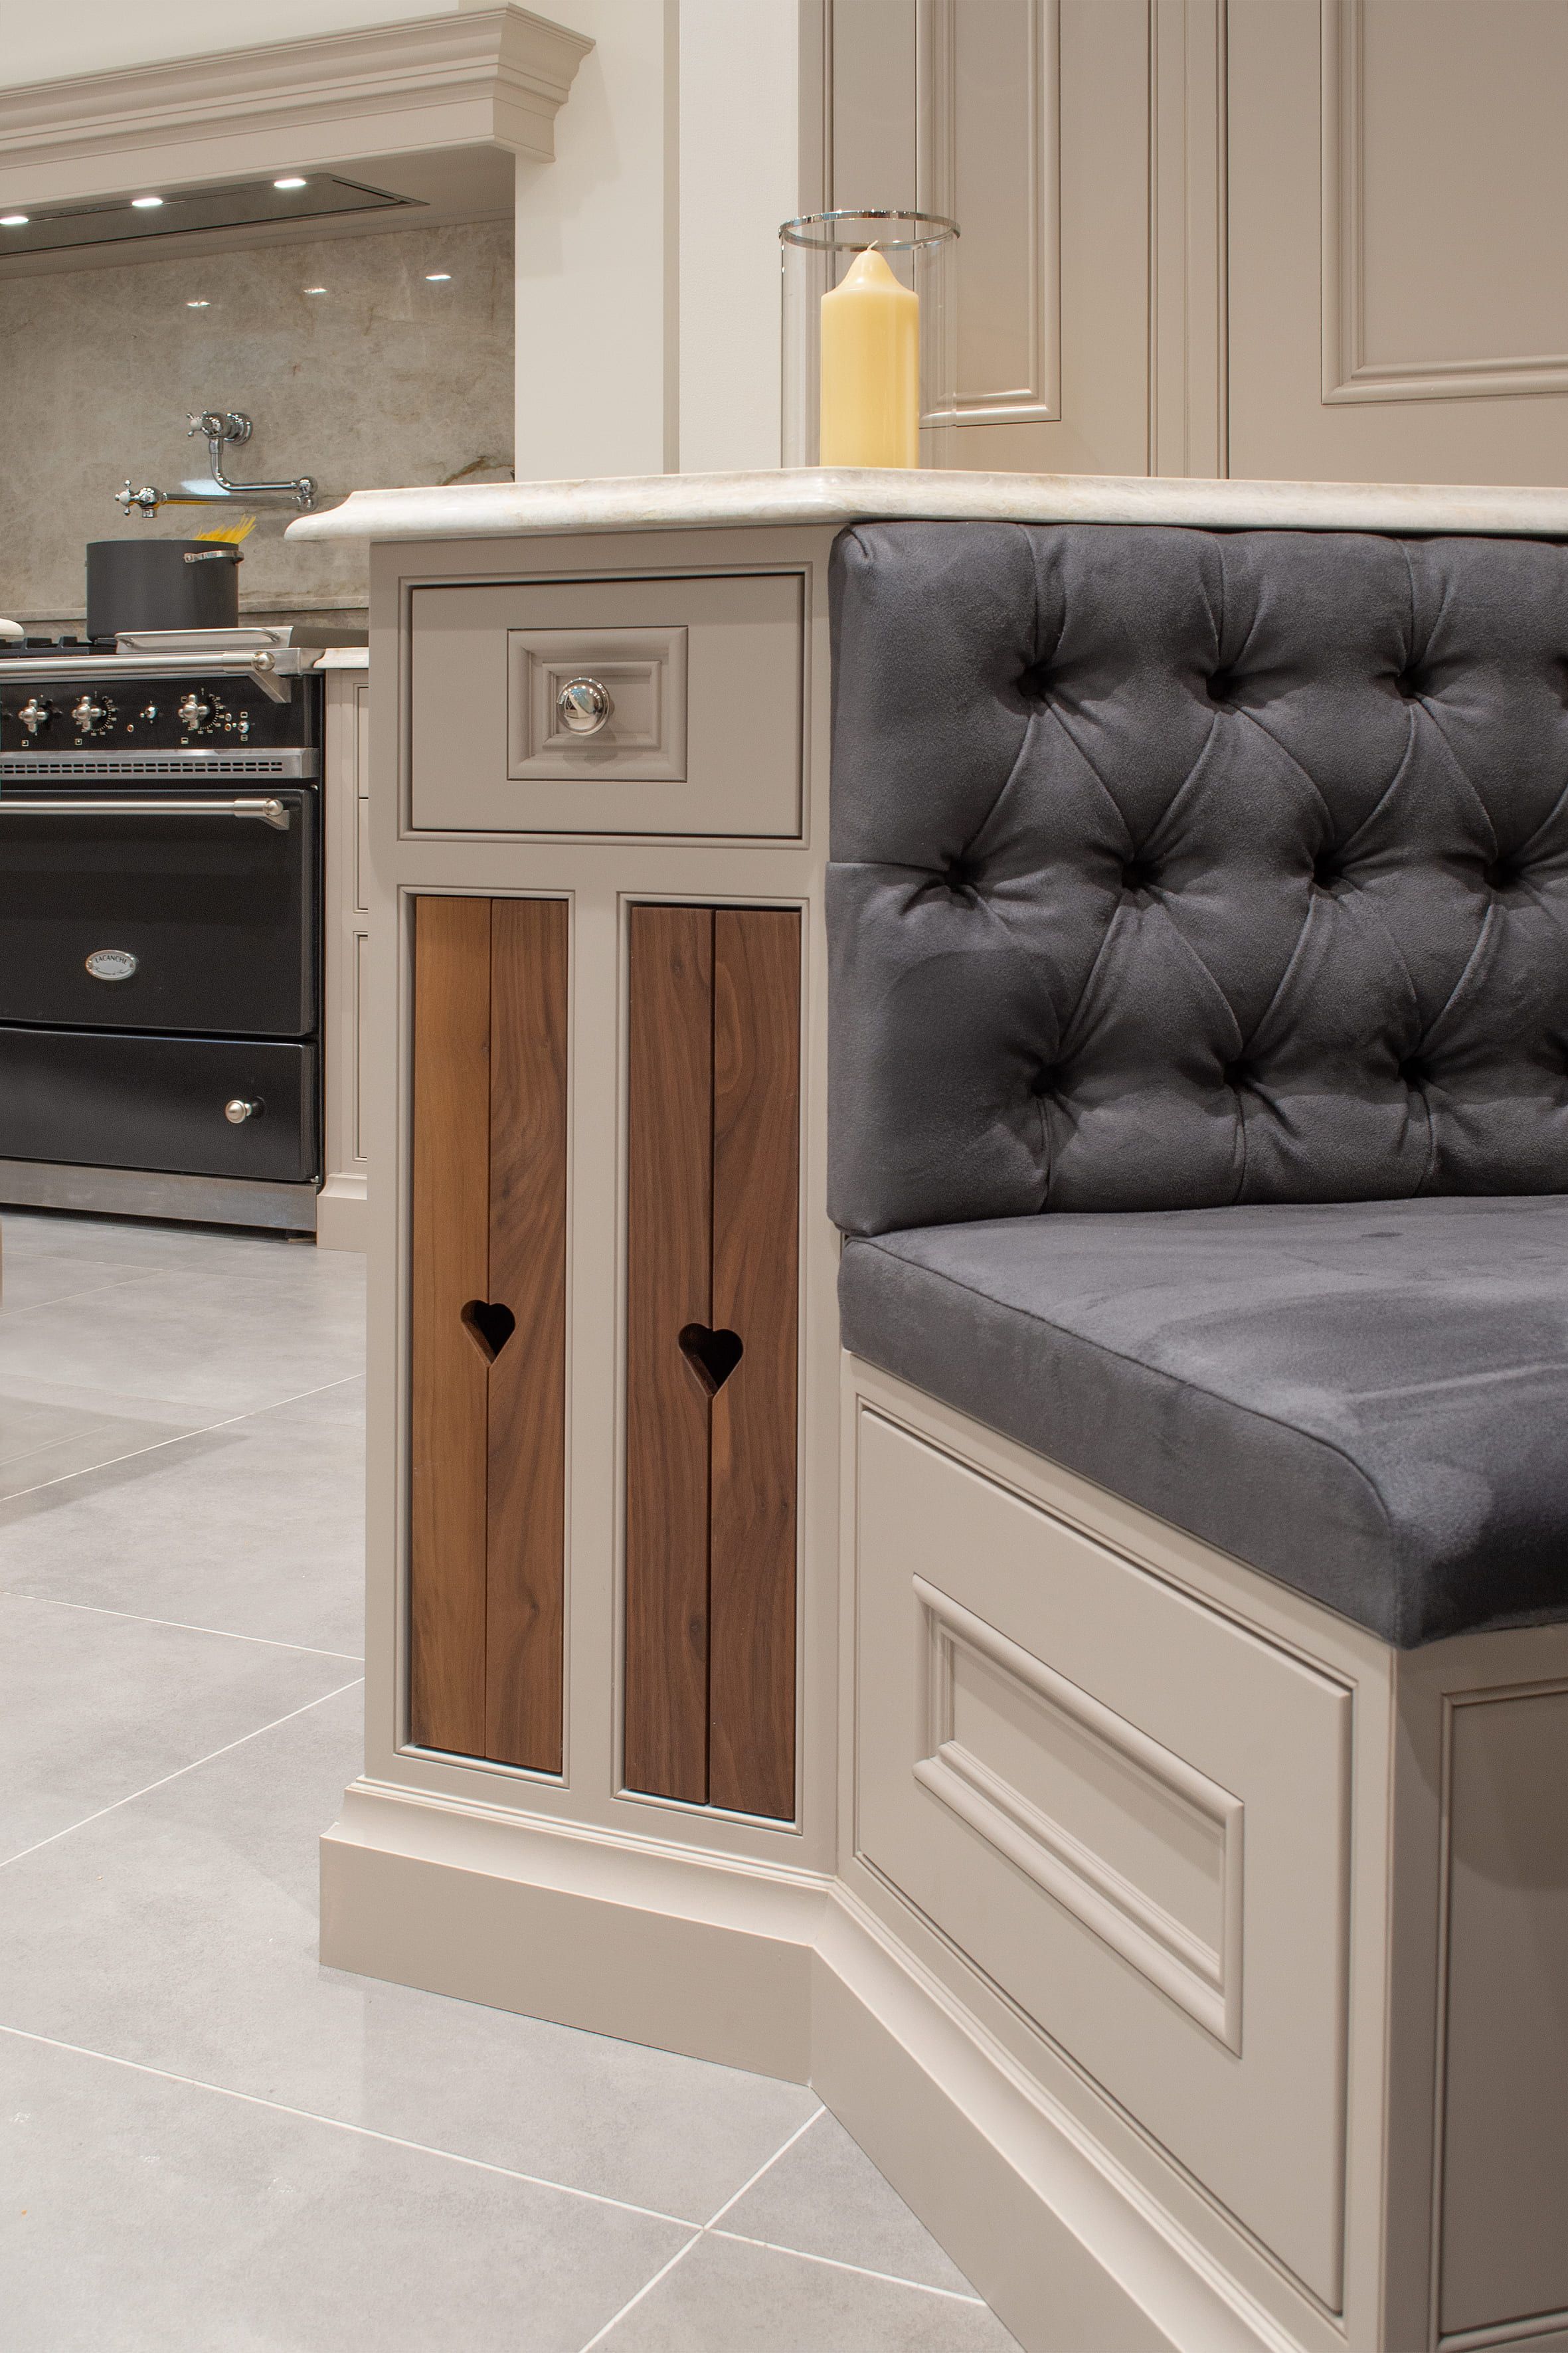 A bespoke bench seat with built-in cabinets and drawers. In the background a large, integrated range cooker can be seen 